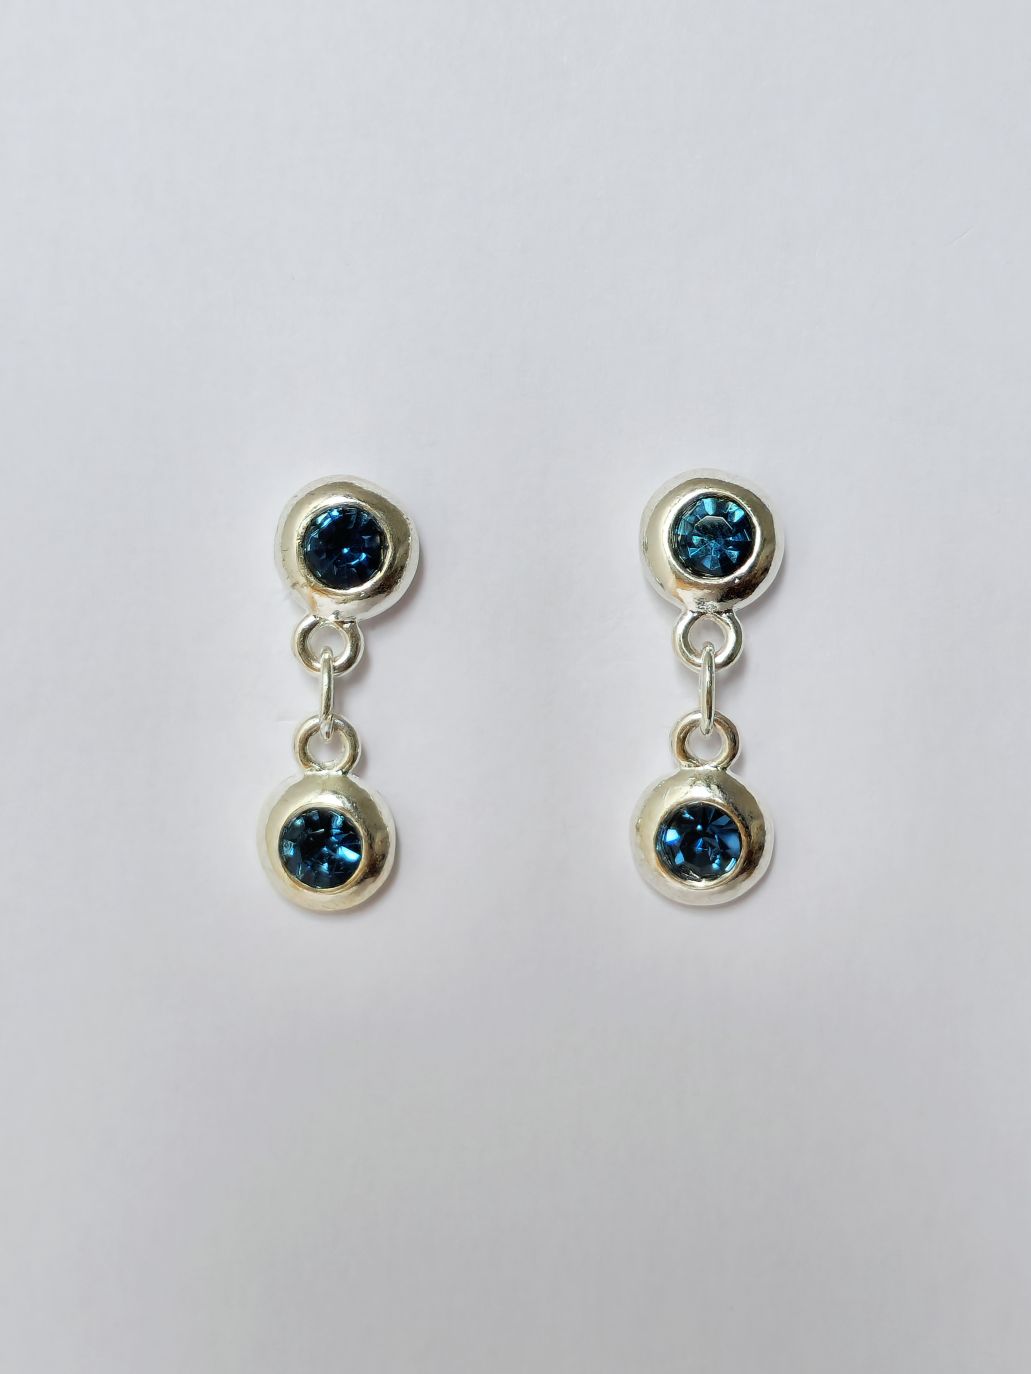 Vintage Silver Plated Drop Earrings with Blue Crystal Charm